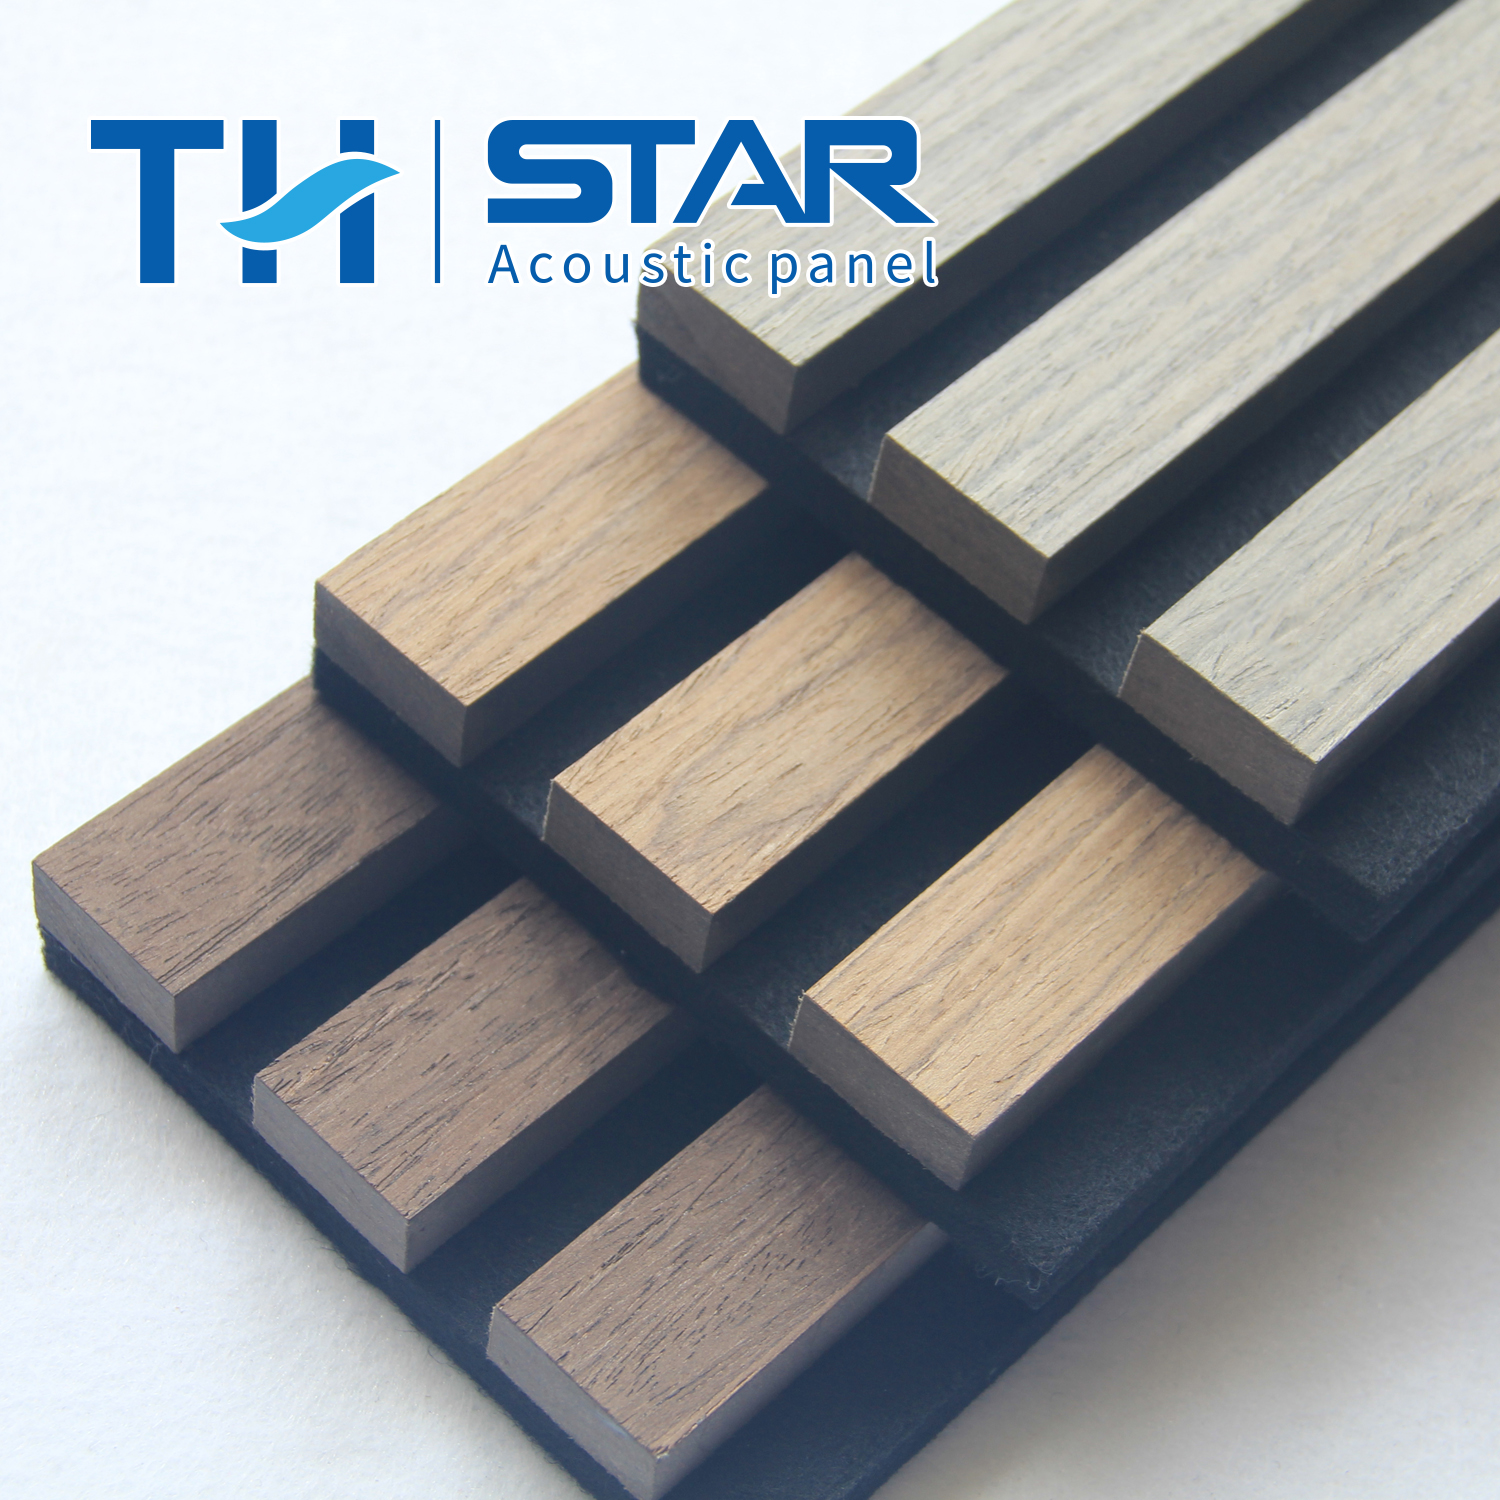 Wooden Sound-Absorbing Acoustic Polyester Slat Wall